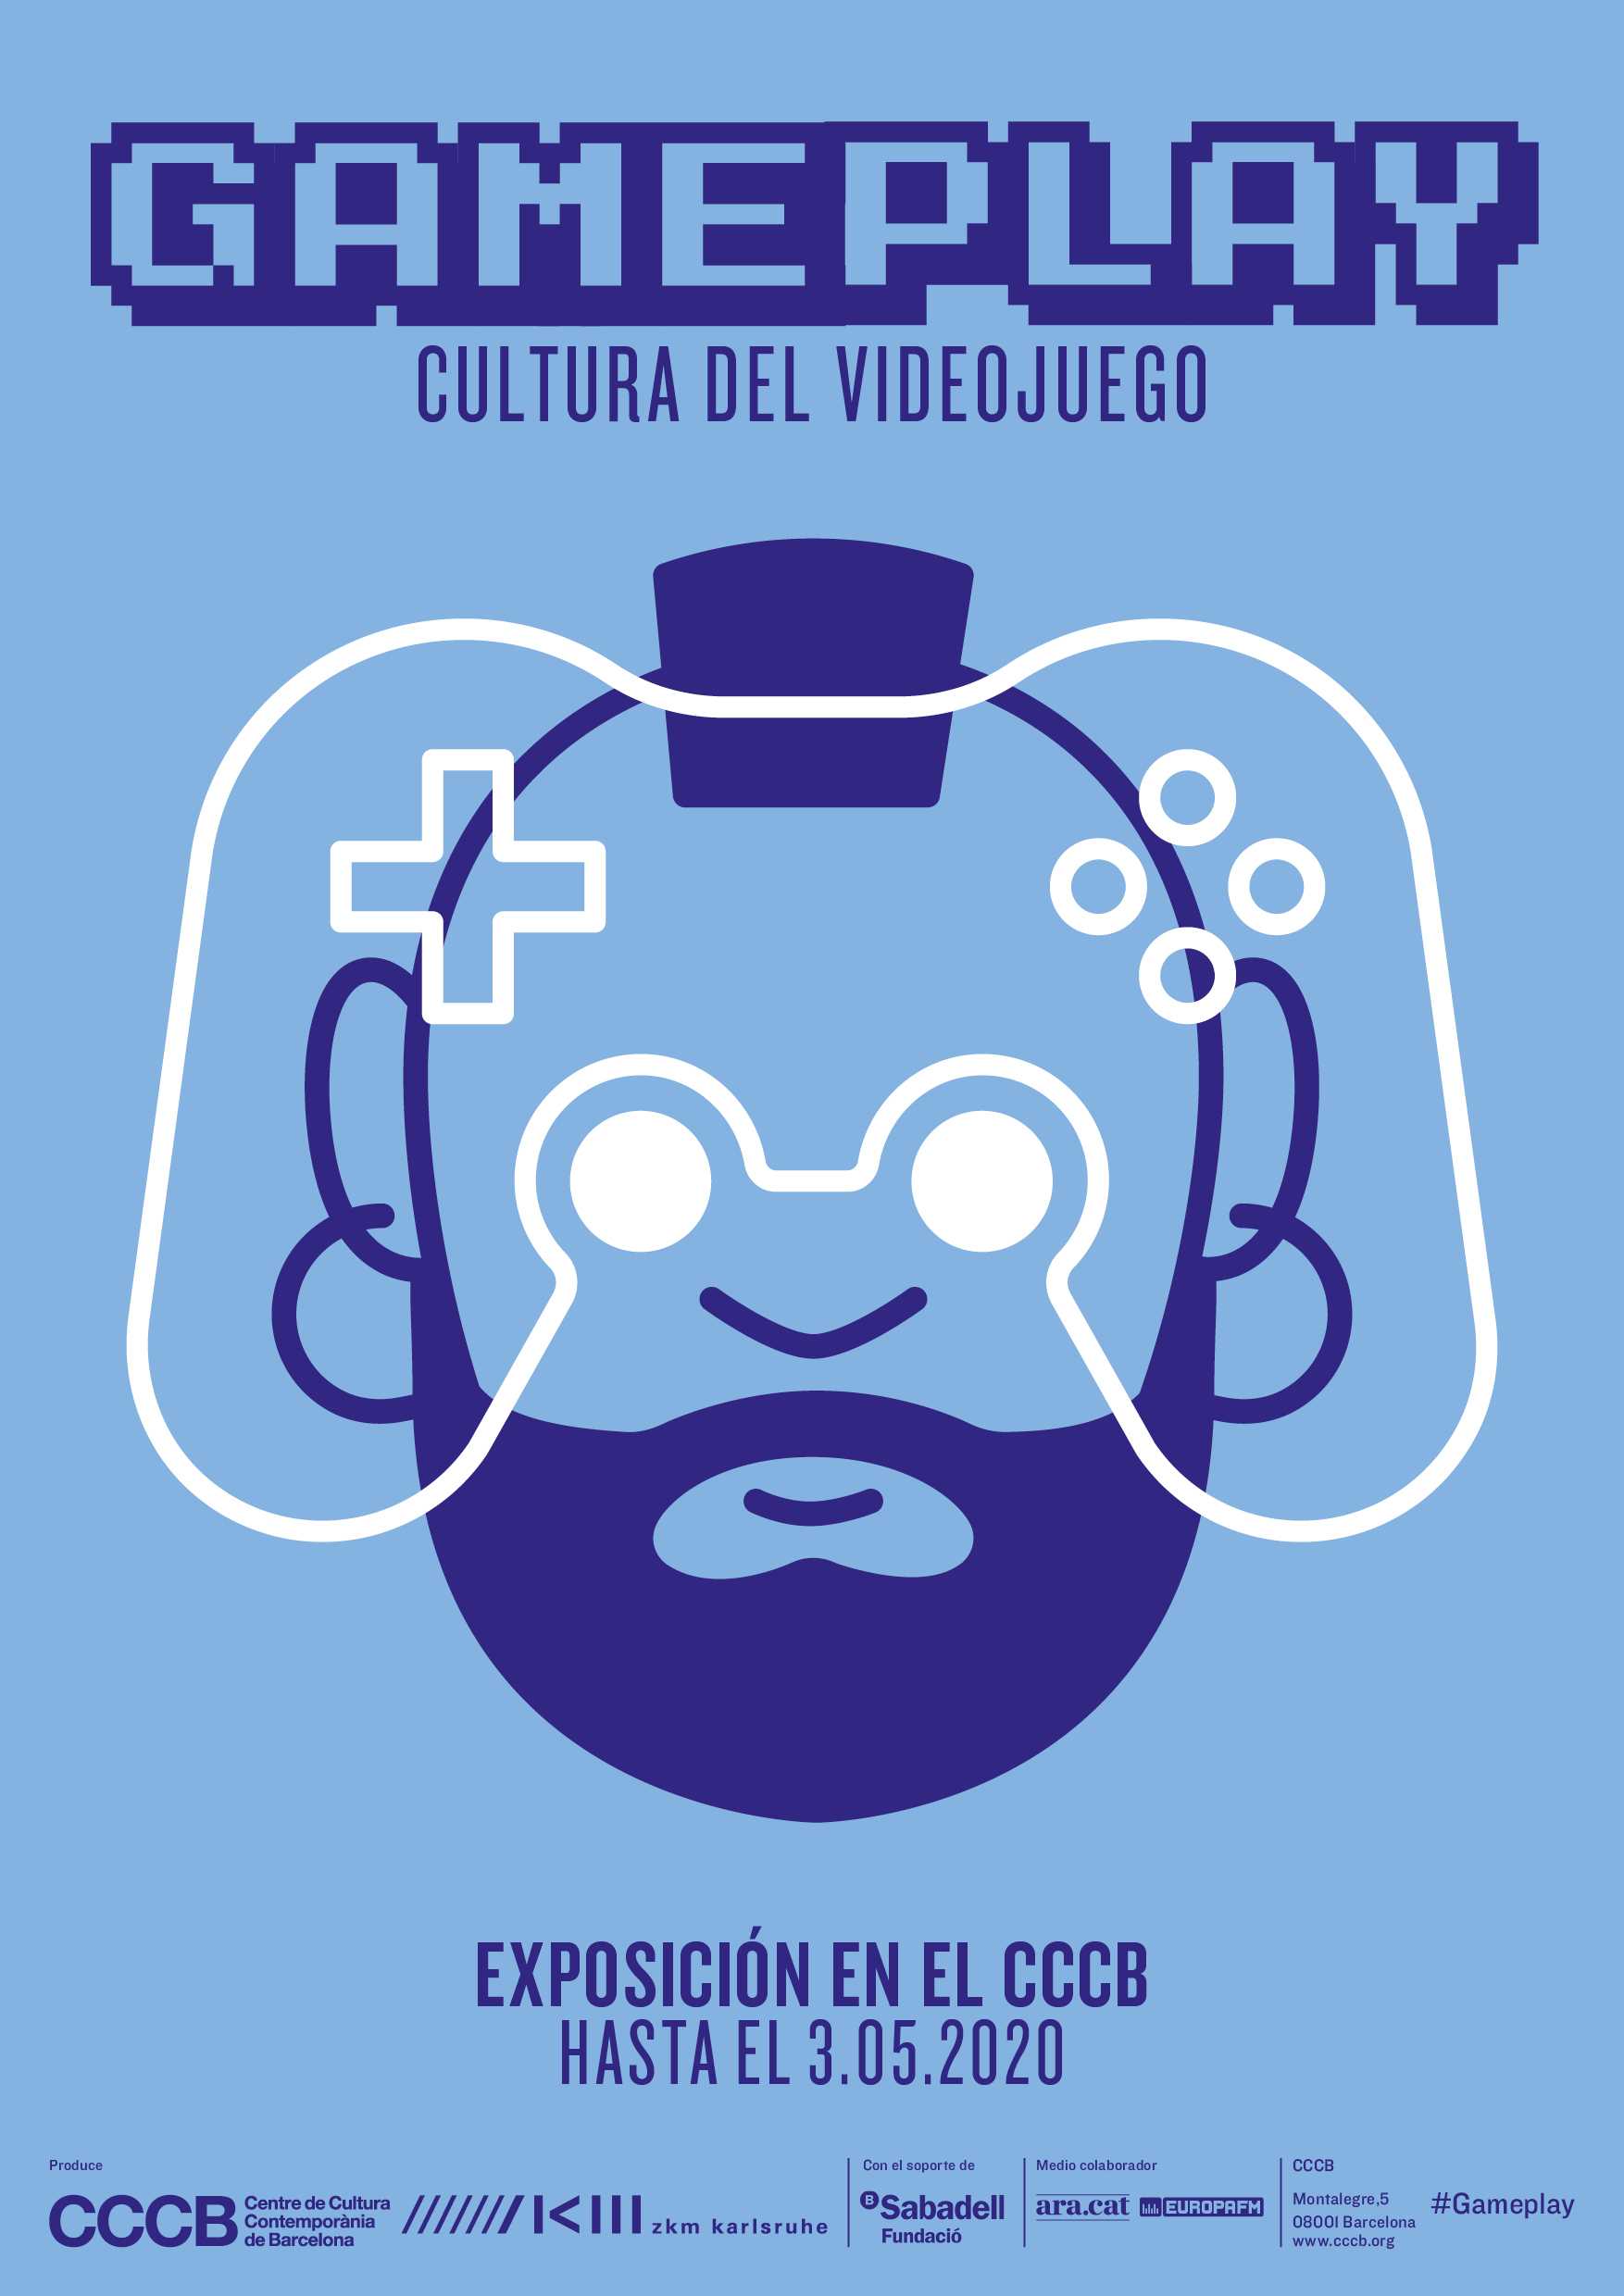 Gameplay. Video Game Culture, Exhibition, CCCB, Barcelona:  19 December 2019- 3 May 2020